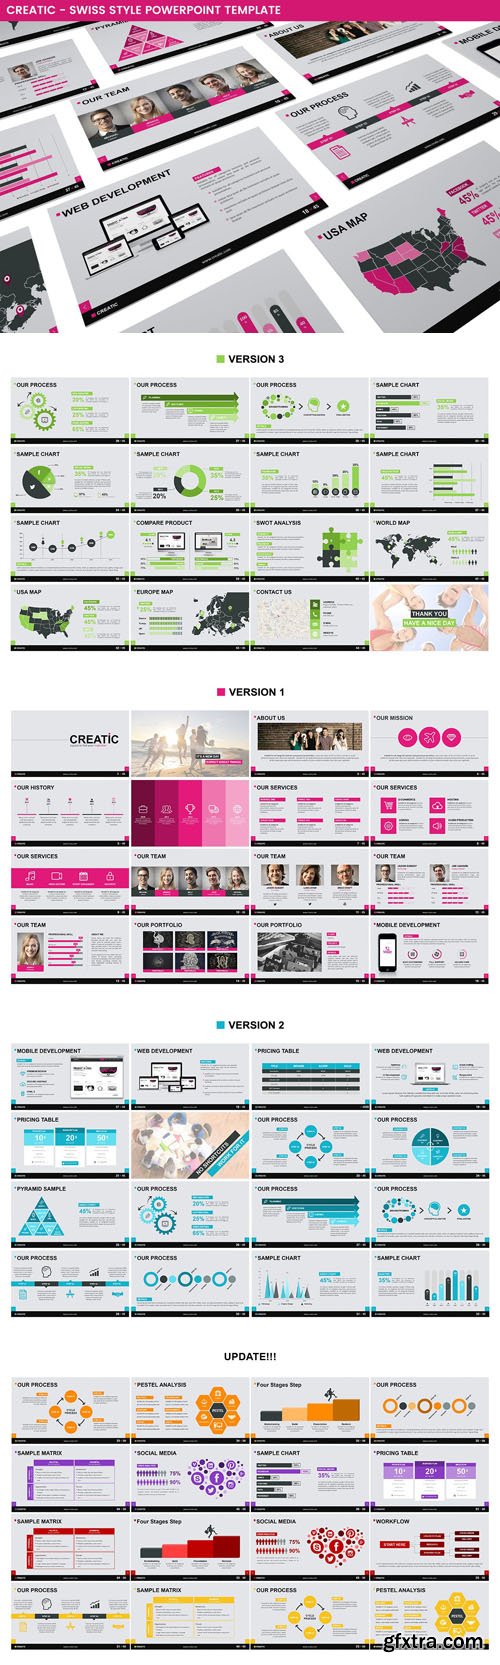 Creatic Powerpoint Template